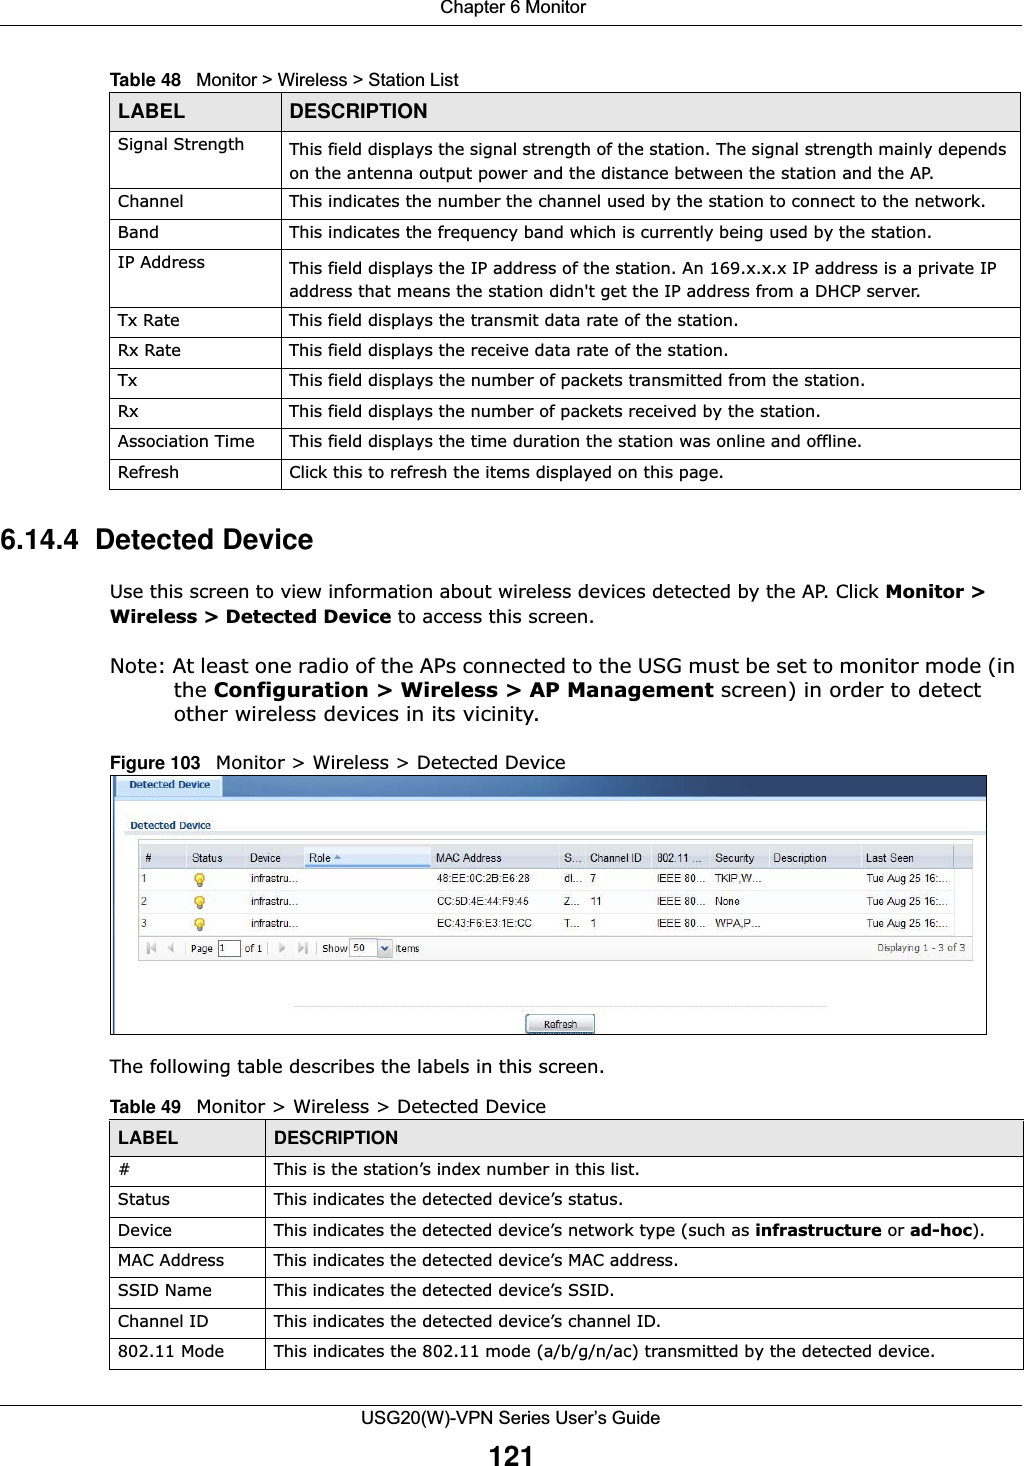  Chapter 6 MonitorUSG20(W)-VPN Series User’s Guide1216.14.4  Detected Device Use this screen to view information about wireless devices detected by the AP. Click Monitor &gt; Wireless &gt; Detected Device to access this screen.Note: At least one radio of the APs connected to the USG must be set to monitor mode (in the Configuration &gt; Wireless &gt; AP Management screen) in order to detect other wireless devices in its vicinity.Figure 103   Monitor &gt; Wireless &gt; Detected Device The following table describes the labels in this screen.  Signal Strength This field displays the signal strength of the station. The signal strength mainly depends on the antenna output power and the distance between the station and the AP.Channel This indicates the number the channel used by the station to connect to the network.Band This indicates the frequency band which is currently being used by the station.IP Address This field displays the IP address of the station. An 169.x.x.x IP address is a private IP address that means the station didn&apos;t get the IP address from a DHCP server.Tx Rate This field displays the transmit data rate of the station.Rx Rate This field displays the receive data rate of the station.Tx This field displays the number of packets transmitted from the station.Rx This field displays the number of packets received by the station.Association Time This field displays the time duration the station was online and offline. Refresh Click this to refresh the items displayed on this page.Table 48   Monitor &gt; Wireless &gt; Station ListLABEL DESCRIPTIONTable 49   Monitor &gt; Wireless &gt; Detected DeviceLABEL DESCRIPTION# This is the station’s index number in this list.Status This indicates the detected device’s status.Device This indicates the detected device’s network type (such as infrastructure or ad-hoc).MAC Address This indicates the detected device’s MAC address.SSID Name This indicates the detected device’s SSID.Channel ID This indicates the detected device’s channel ID.802.11 Mode This indicates the 802.11 mode (a/b/g/n/ac) transmitted by the detected device.